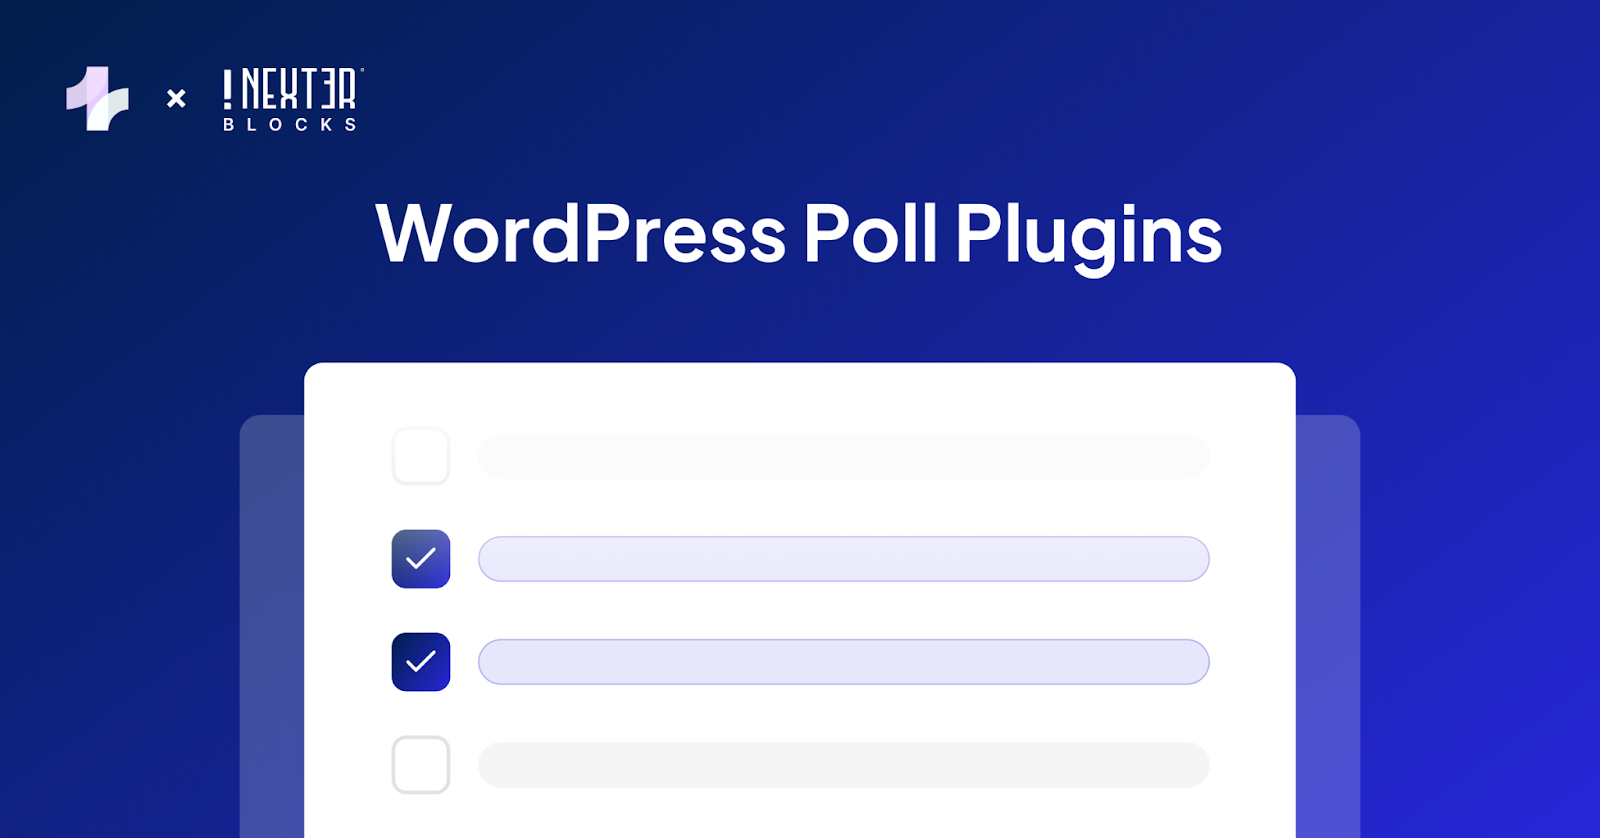 What are WordPress poll Plugins